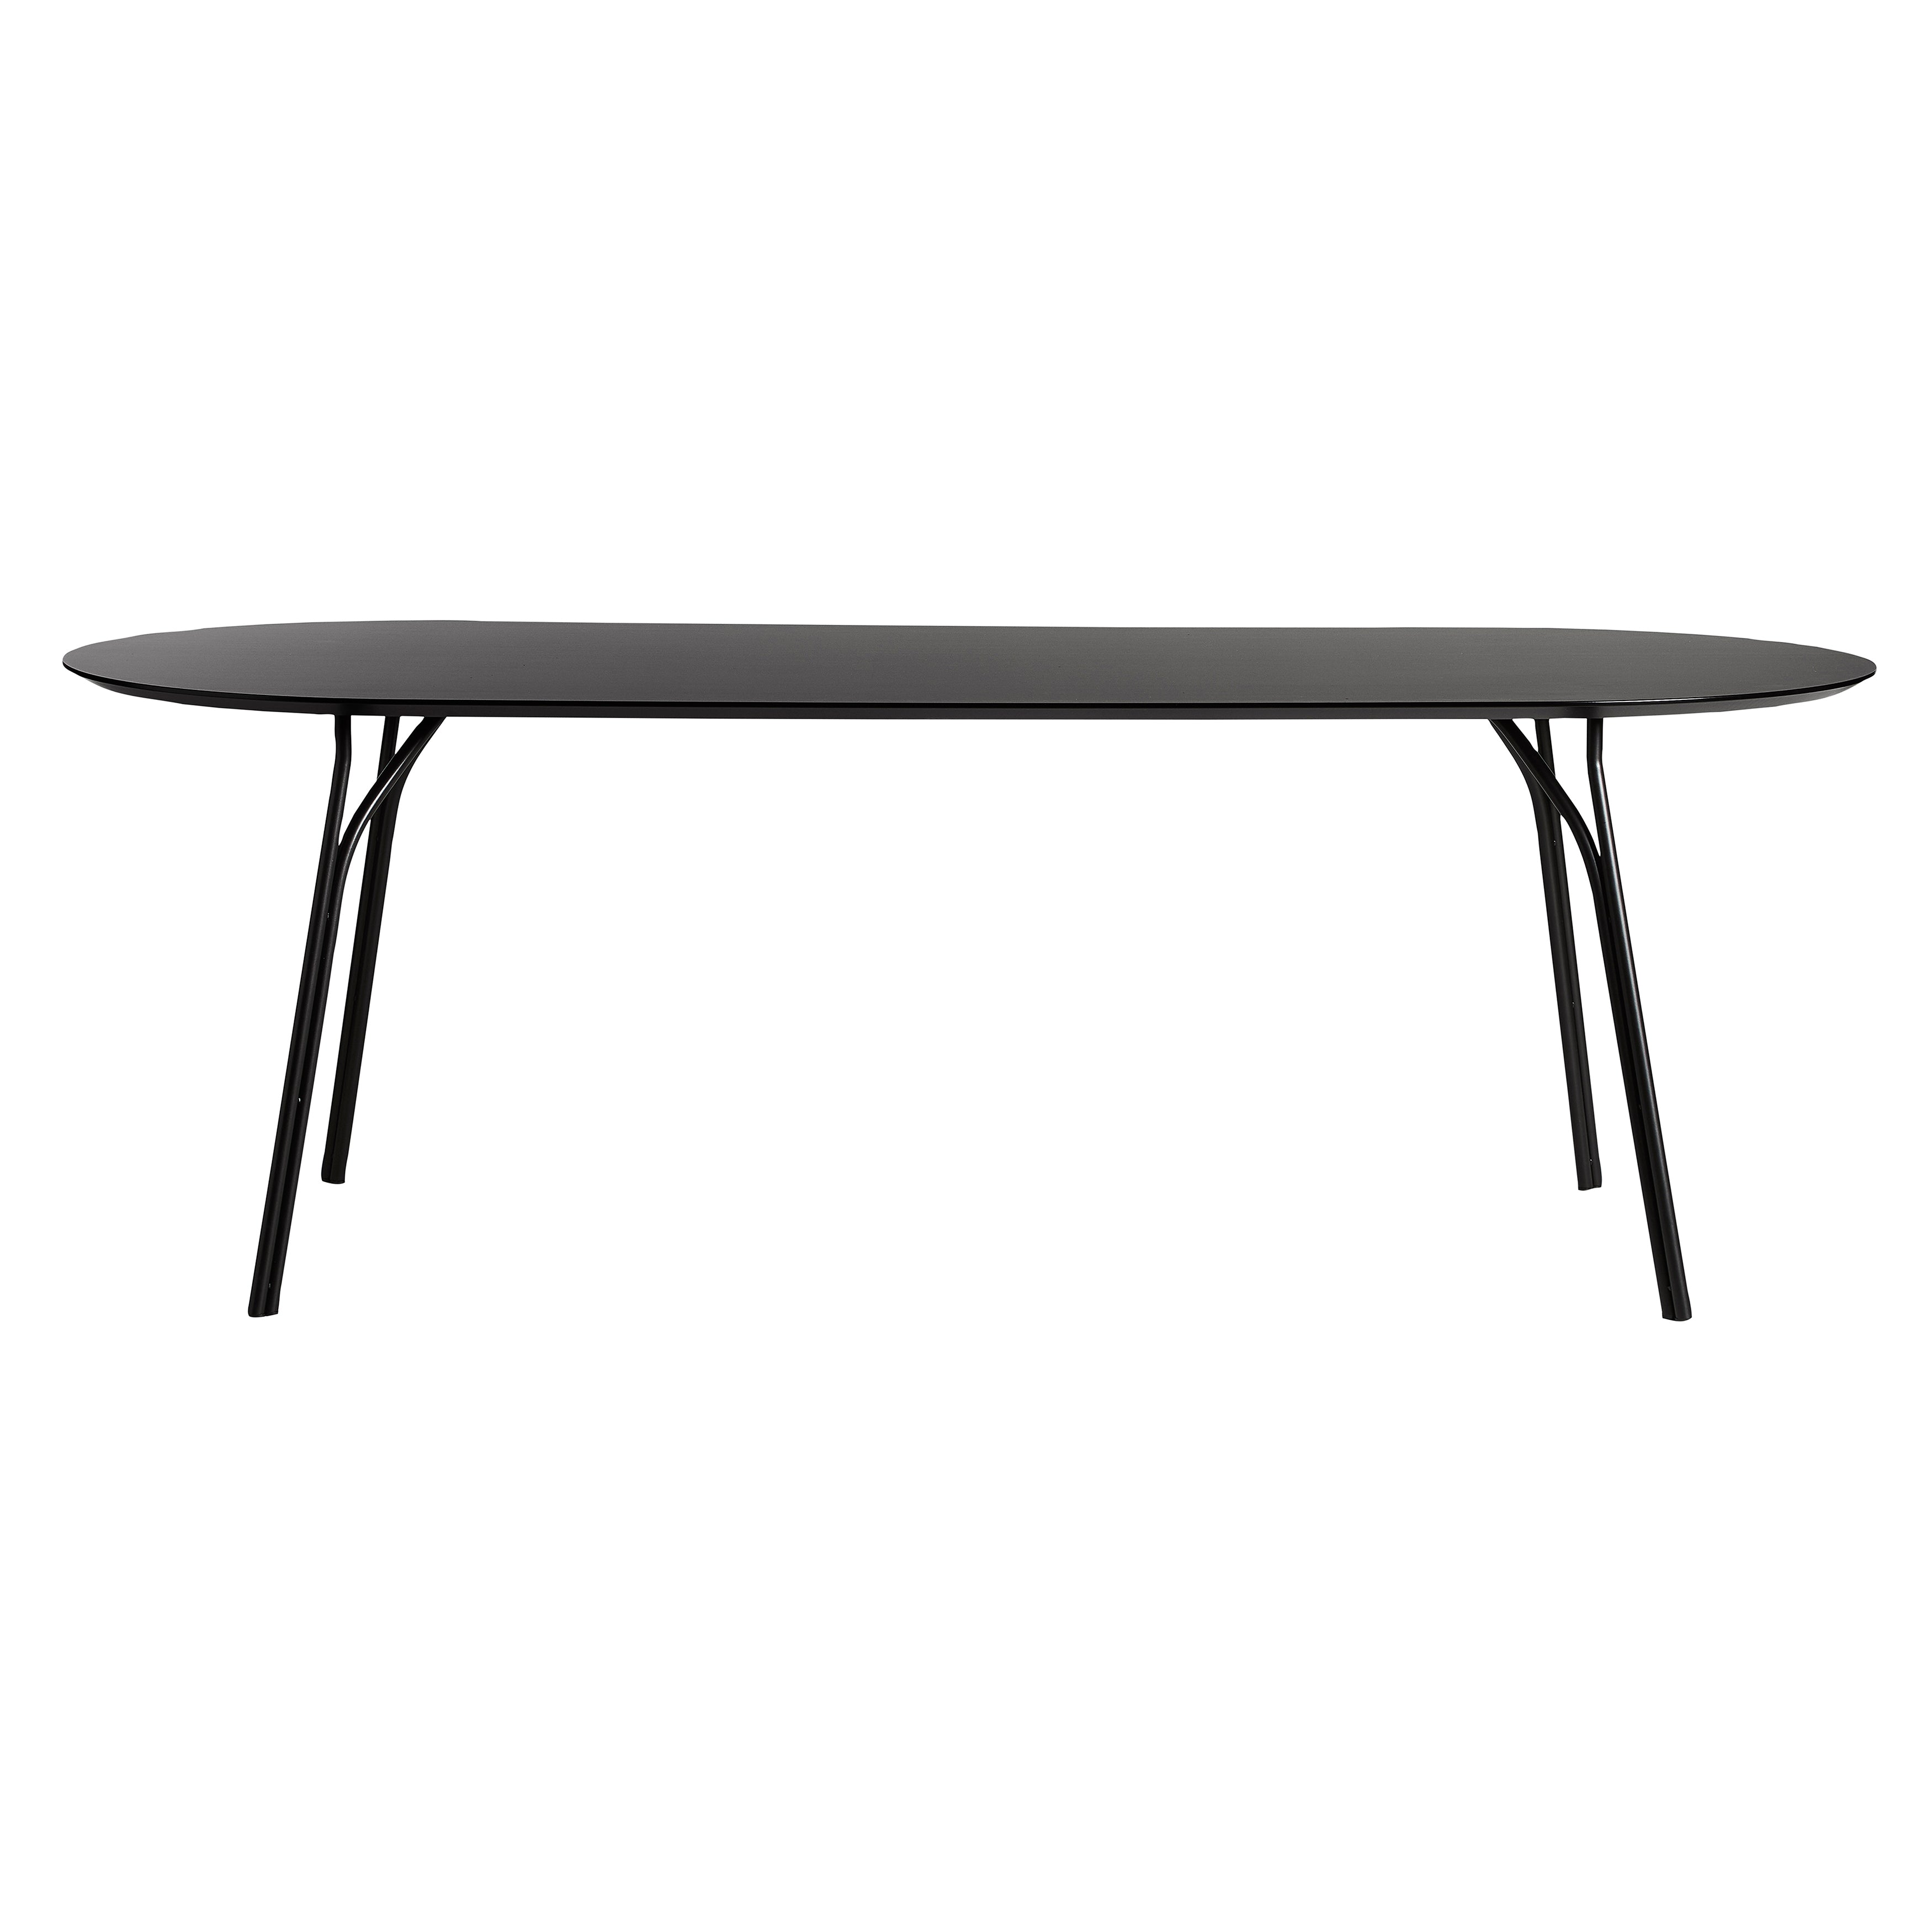 Tree Dining Table: Oval - 86.6